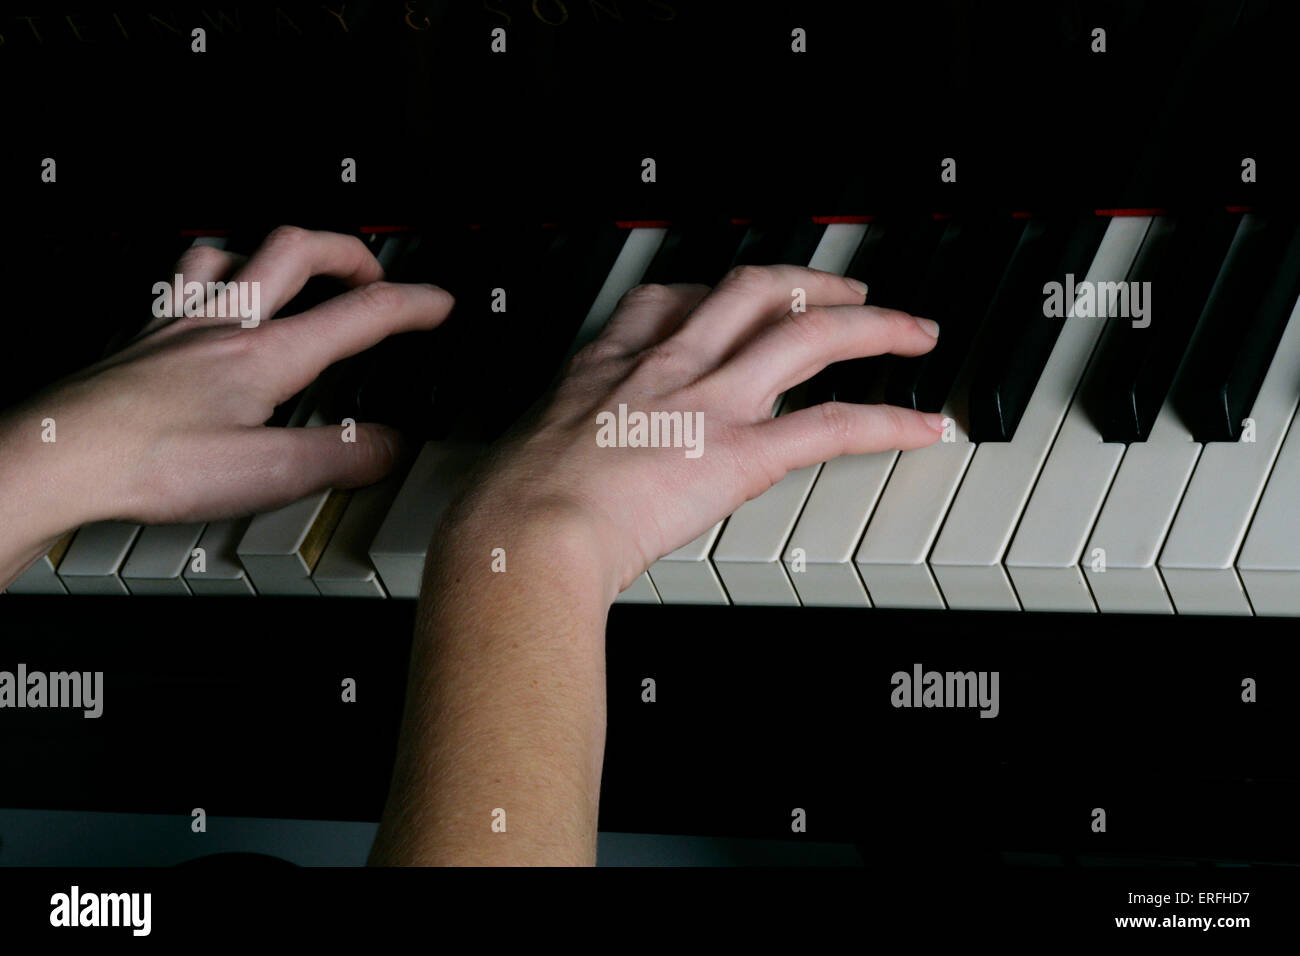 Piano - close-up of a female pianist 's hands on the keyboard. Stock Photo